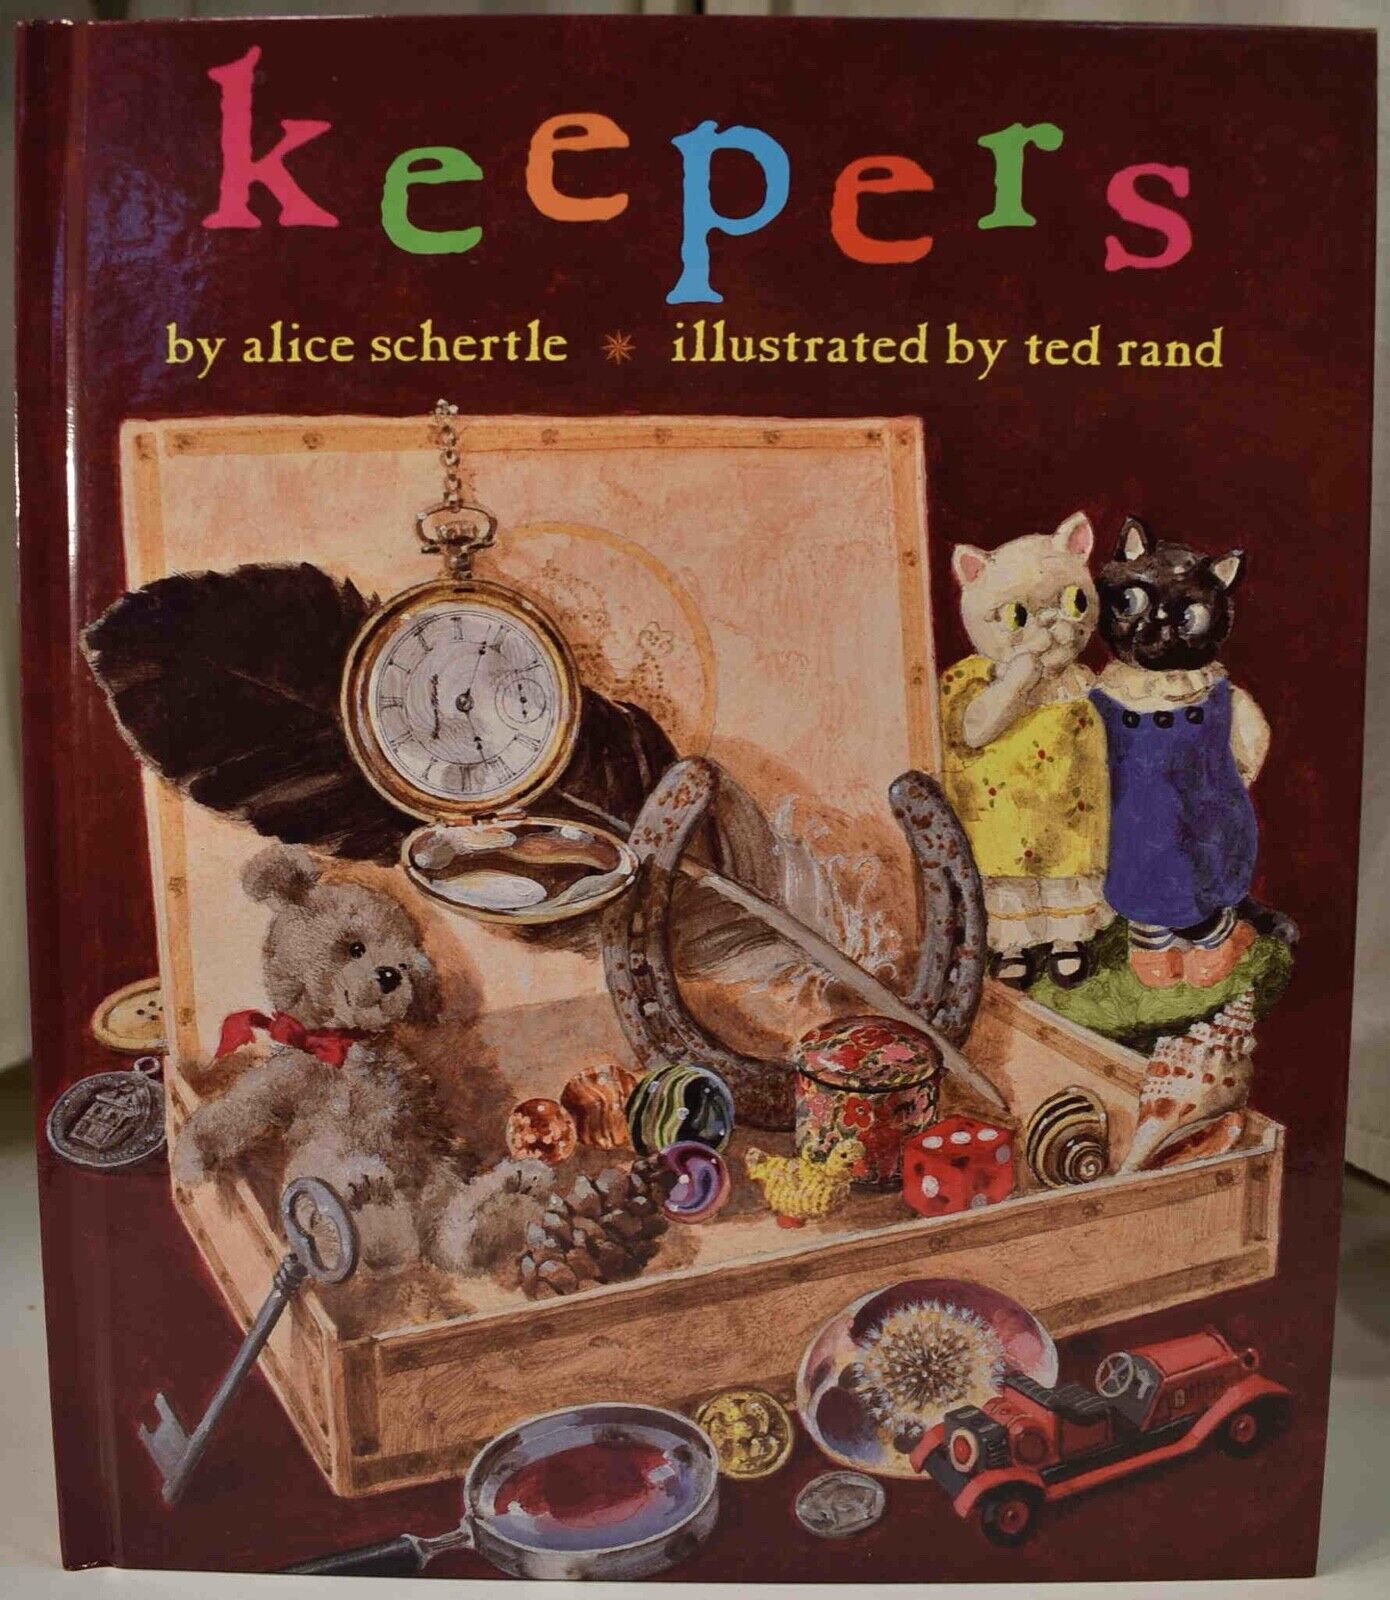 1996 KEEPERS ALICE SCHERTLE TED RAND Illus 1st Ed Author SIGNED Fine